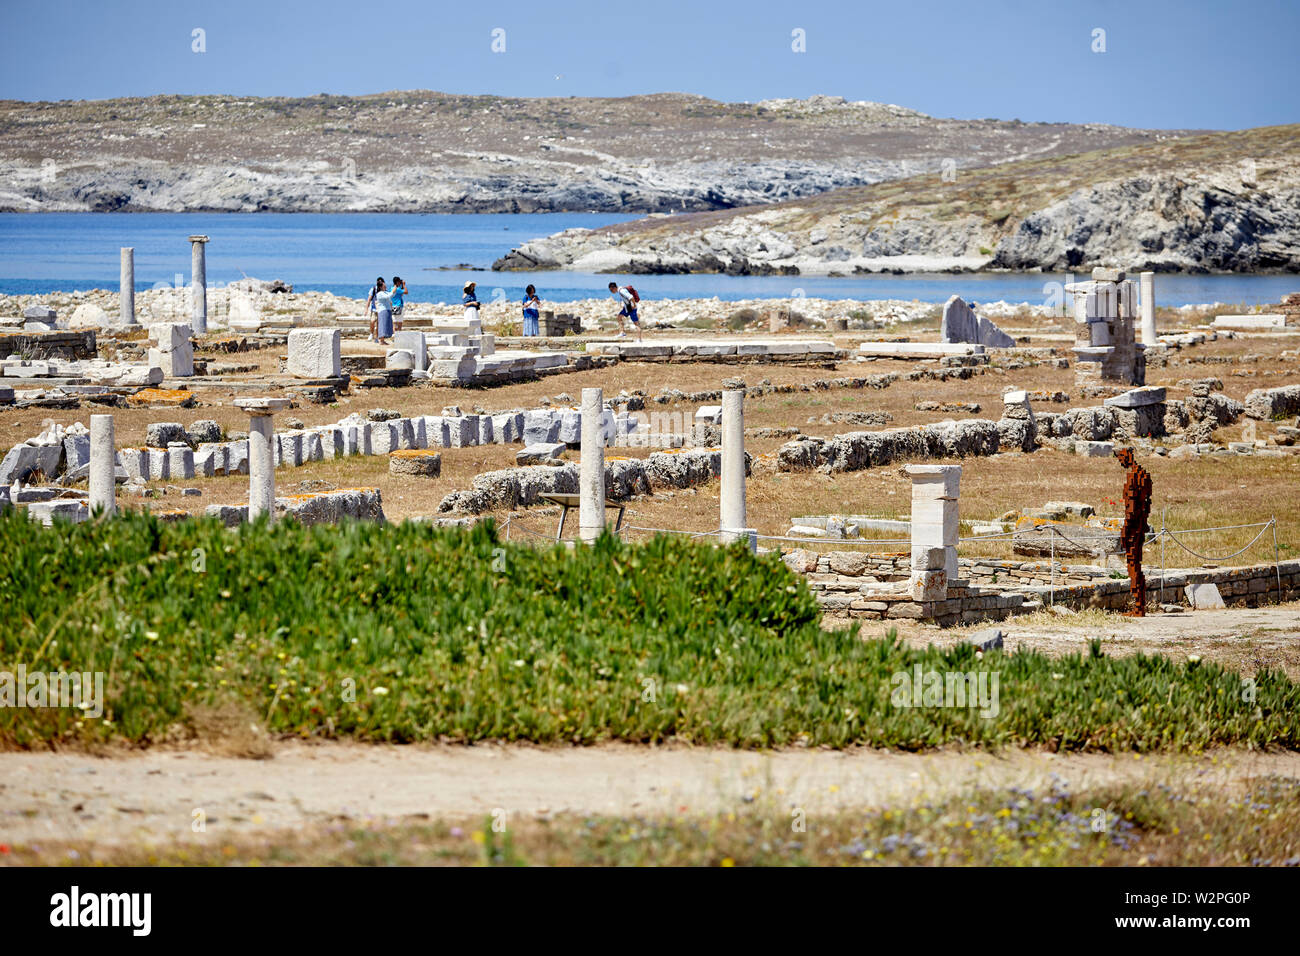 Greek, Greece, Delos historical site island, archaeological ruins with Antony Gormley statues Water* 2018 Stock Photo